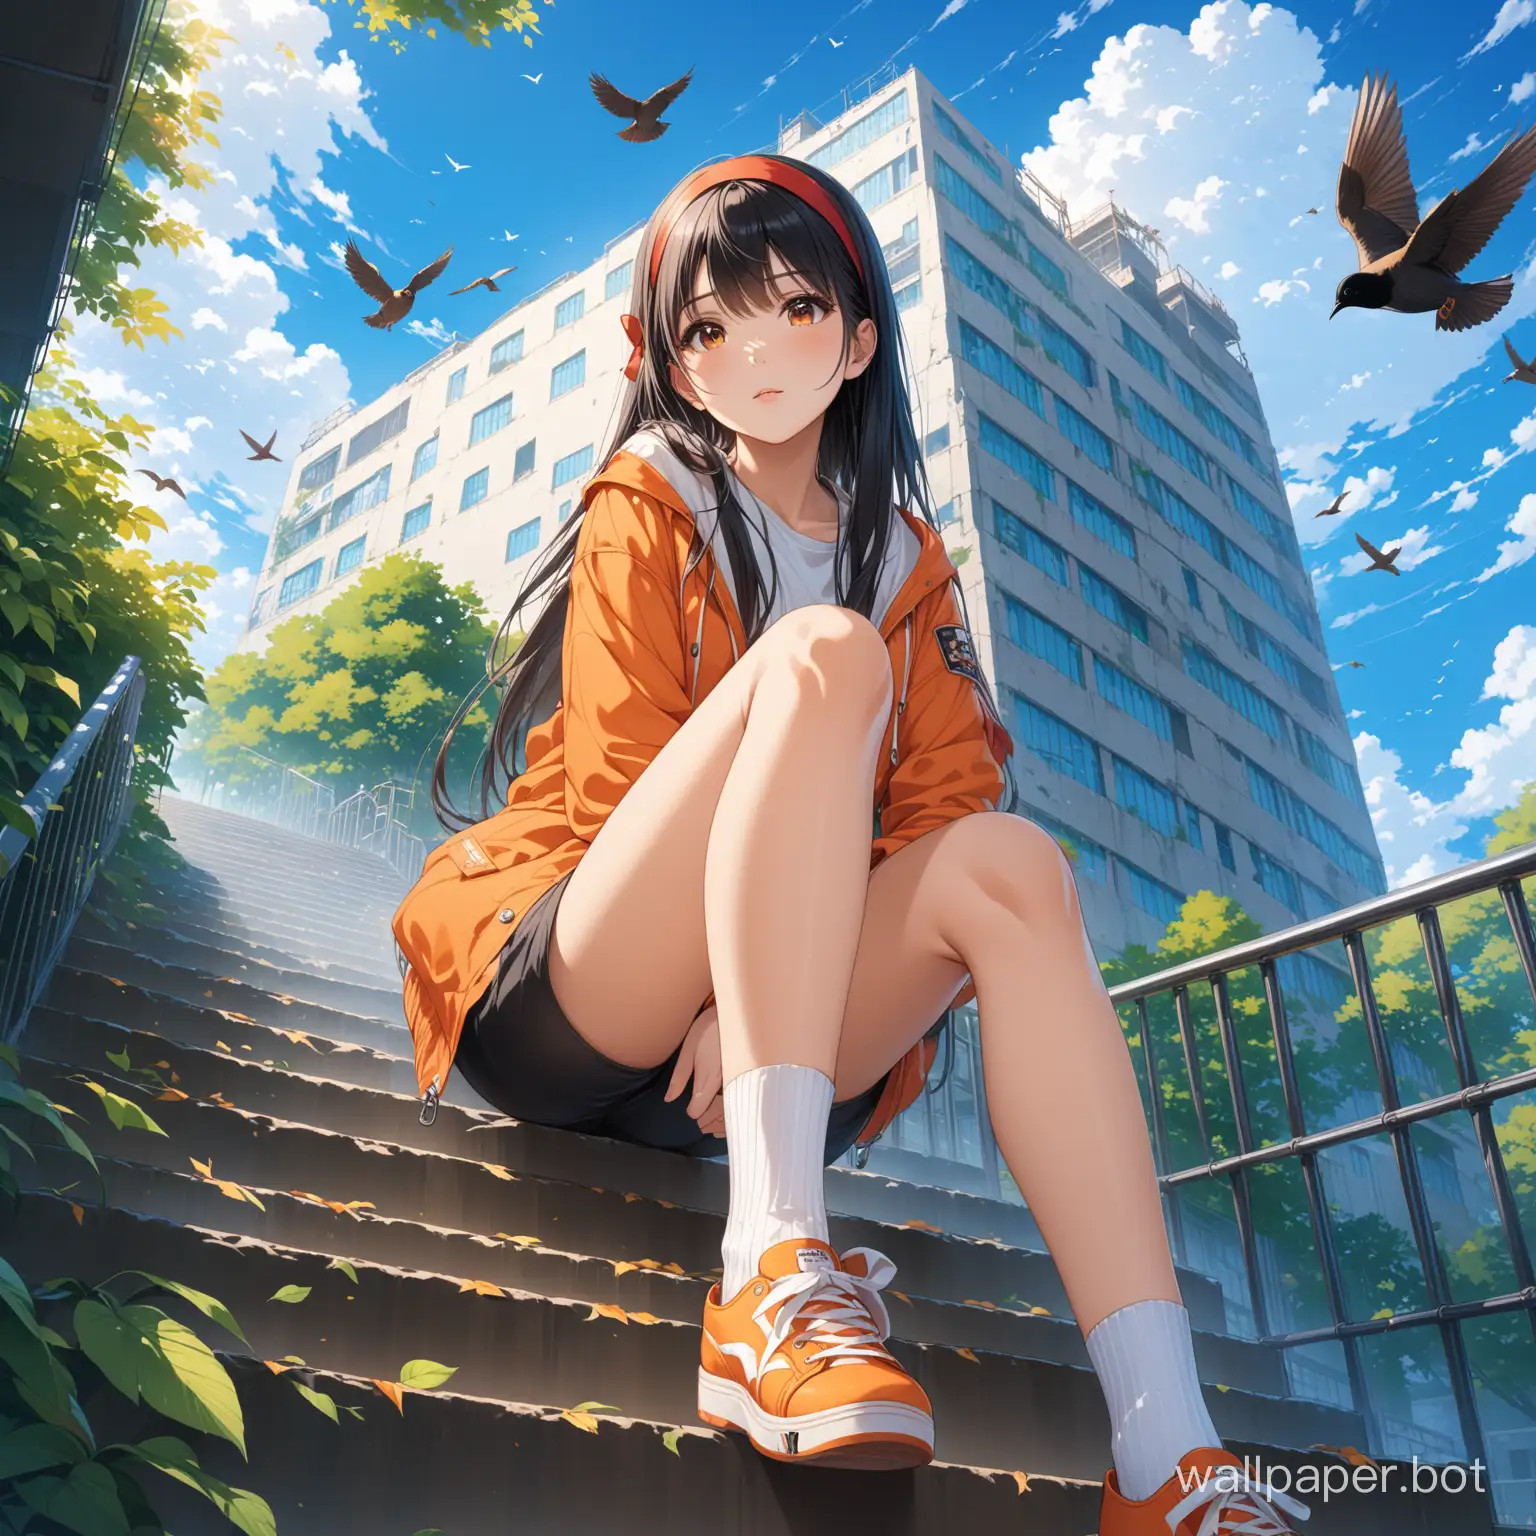 Anime-Girl-with-Long-Black-Hair-Sitting-Outdoors-Under-a-Cloudy-Sky